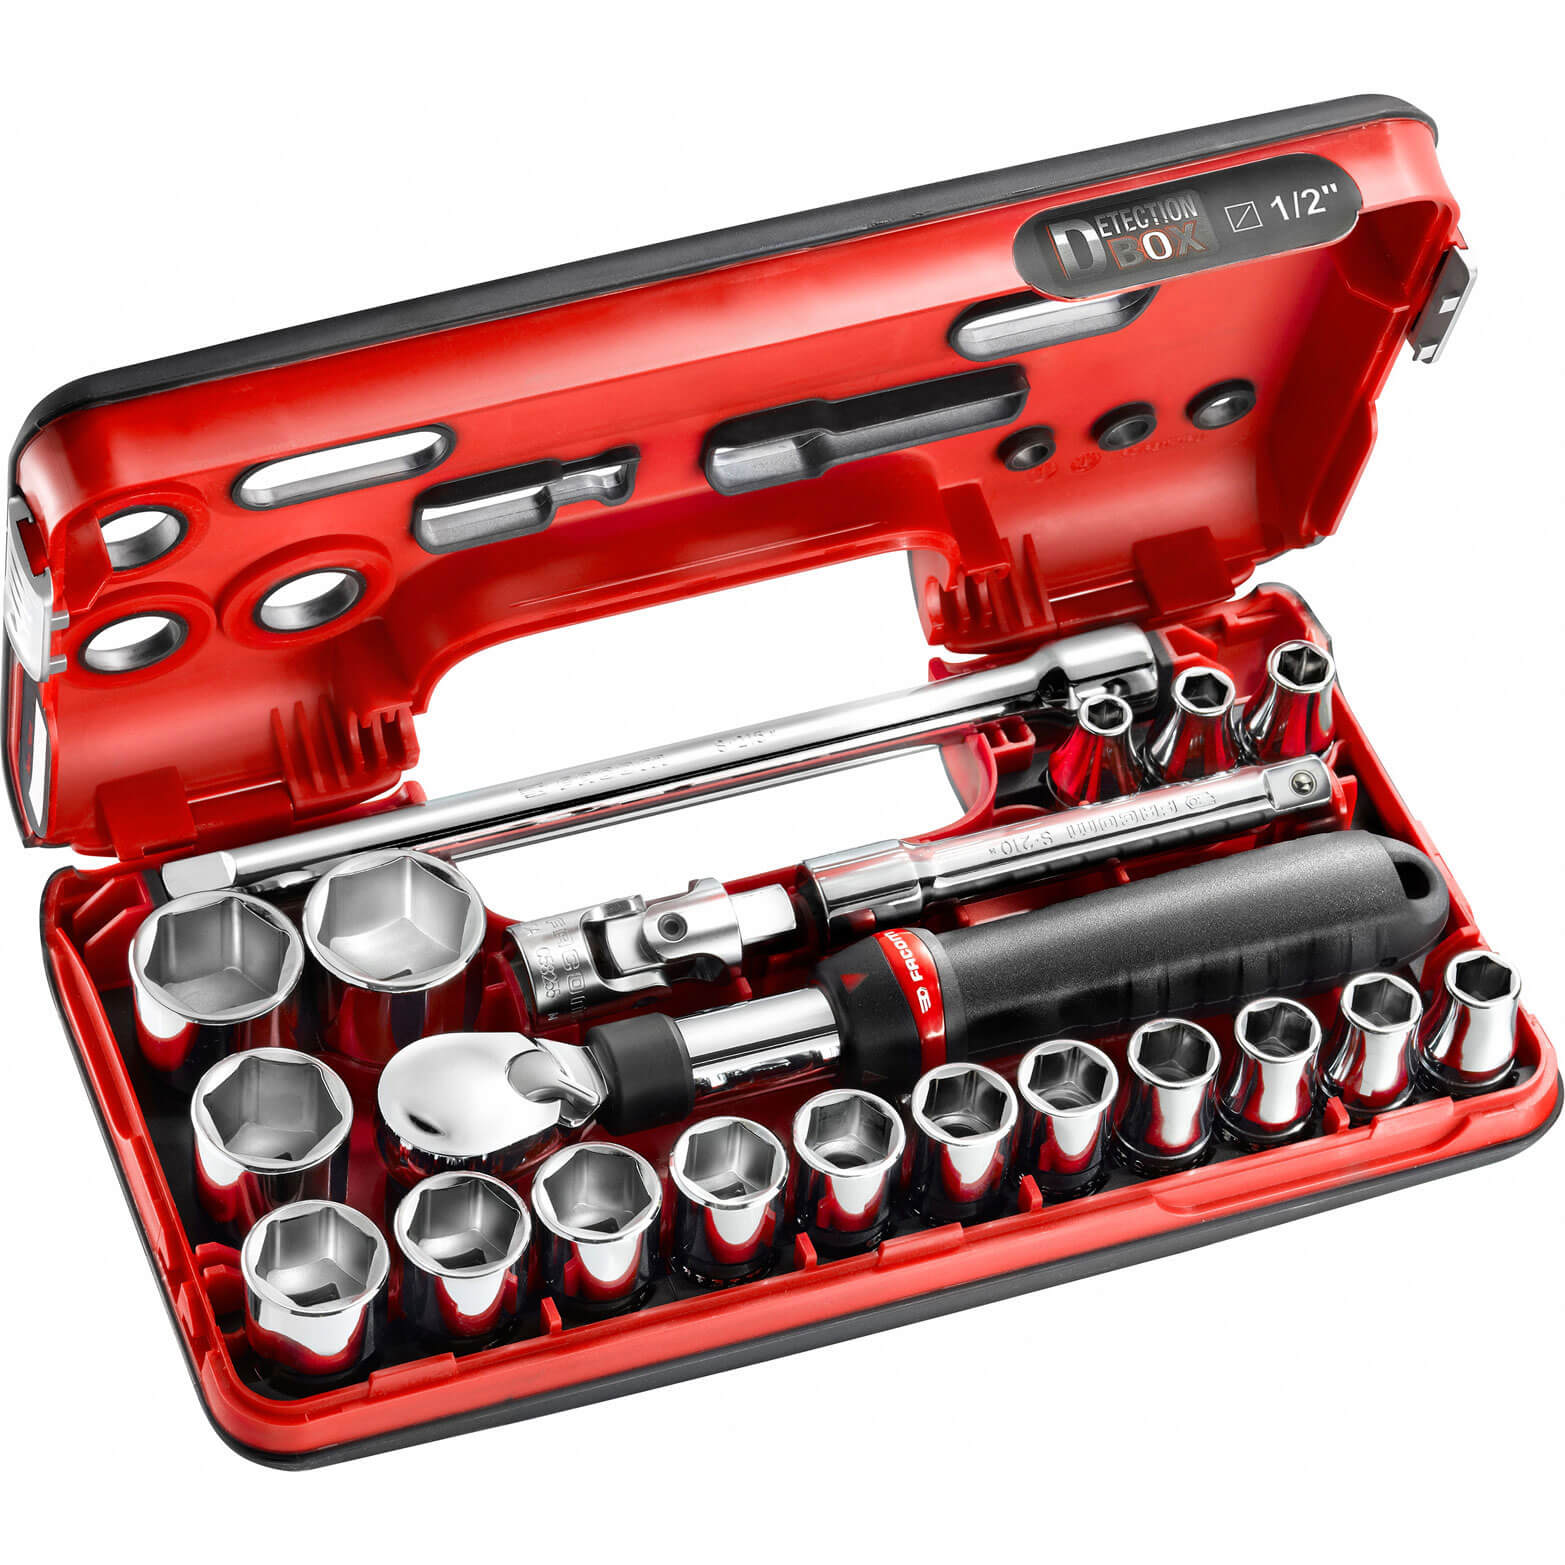 Image of Facom 21 Piece 1/2" Drive Extendable Ratchet and Hex Socket Set Metric in Detection Box 1/2"